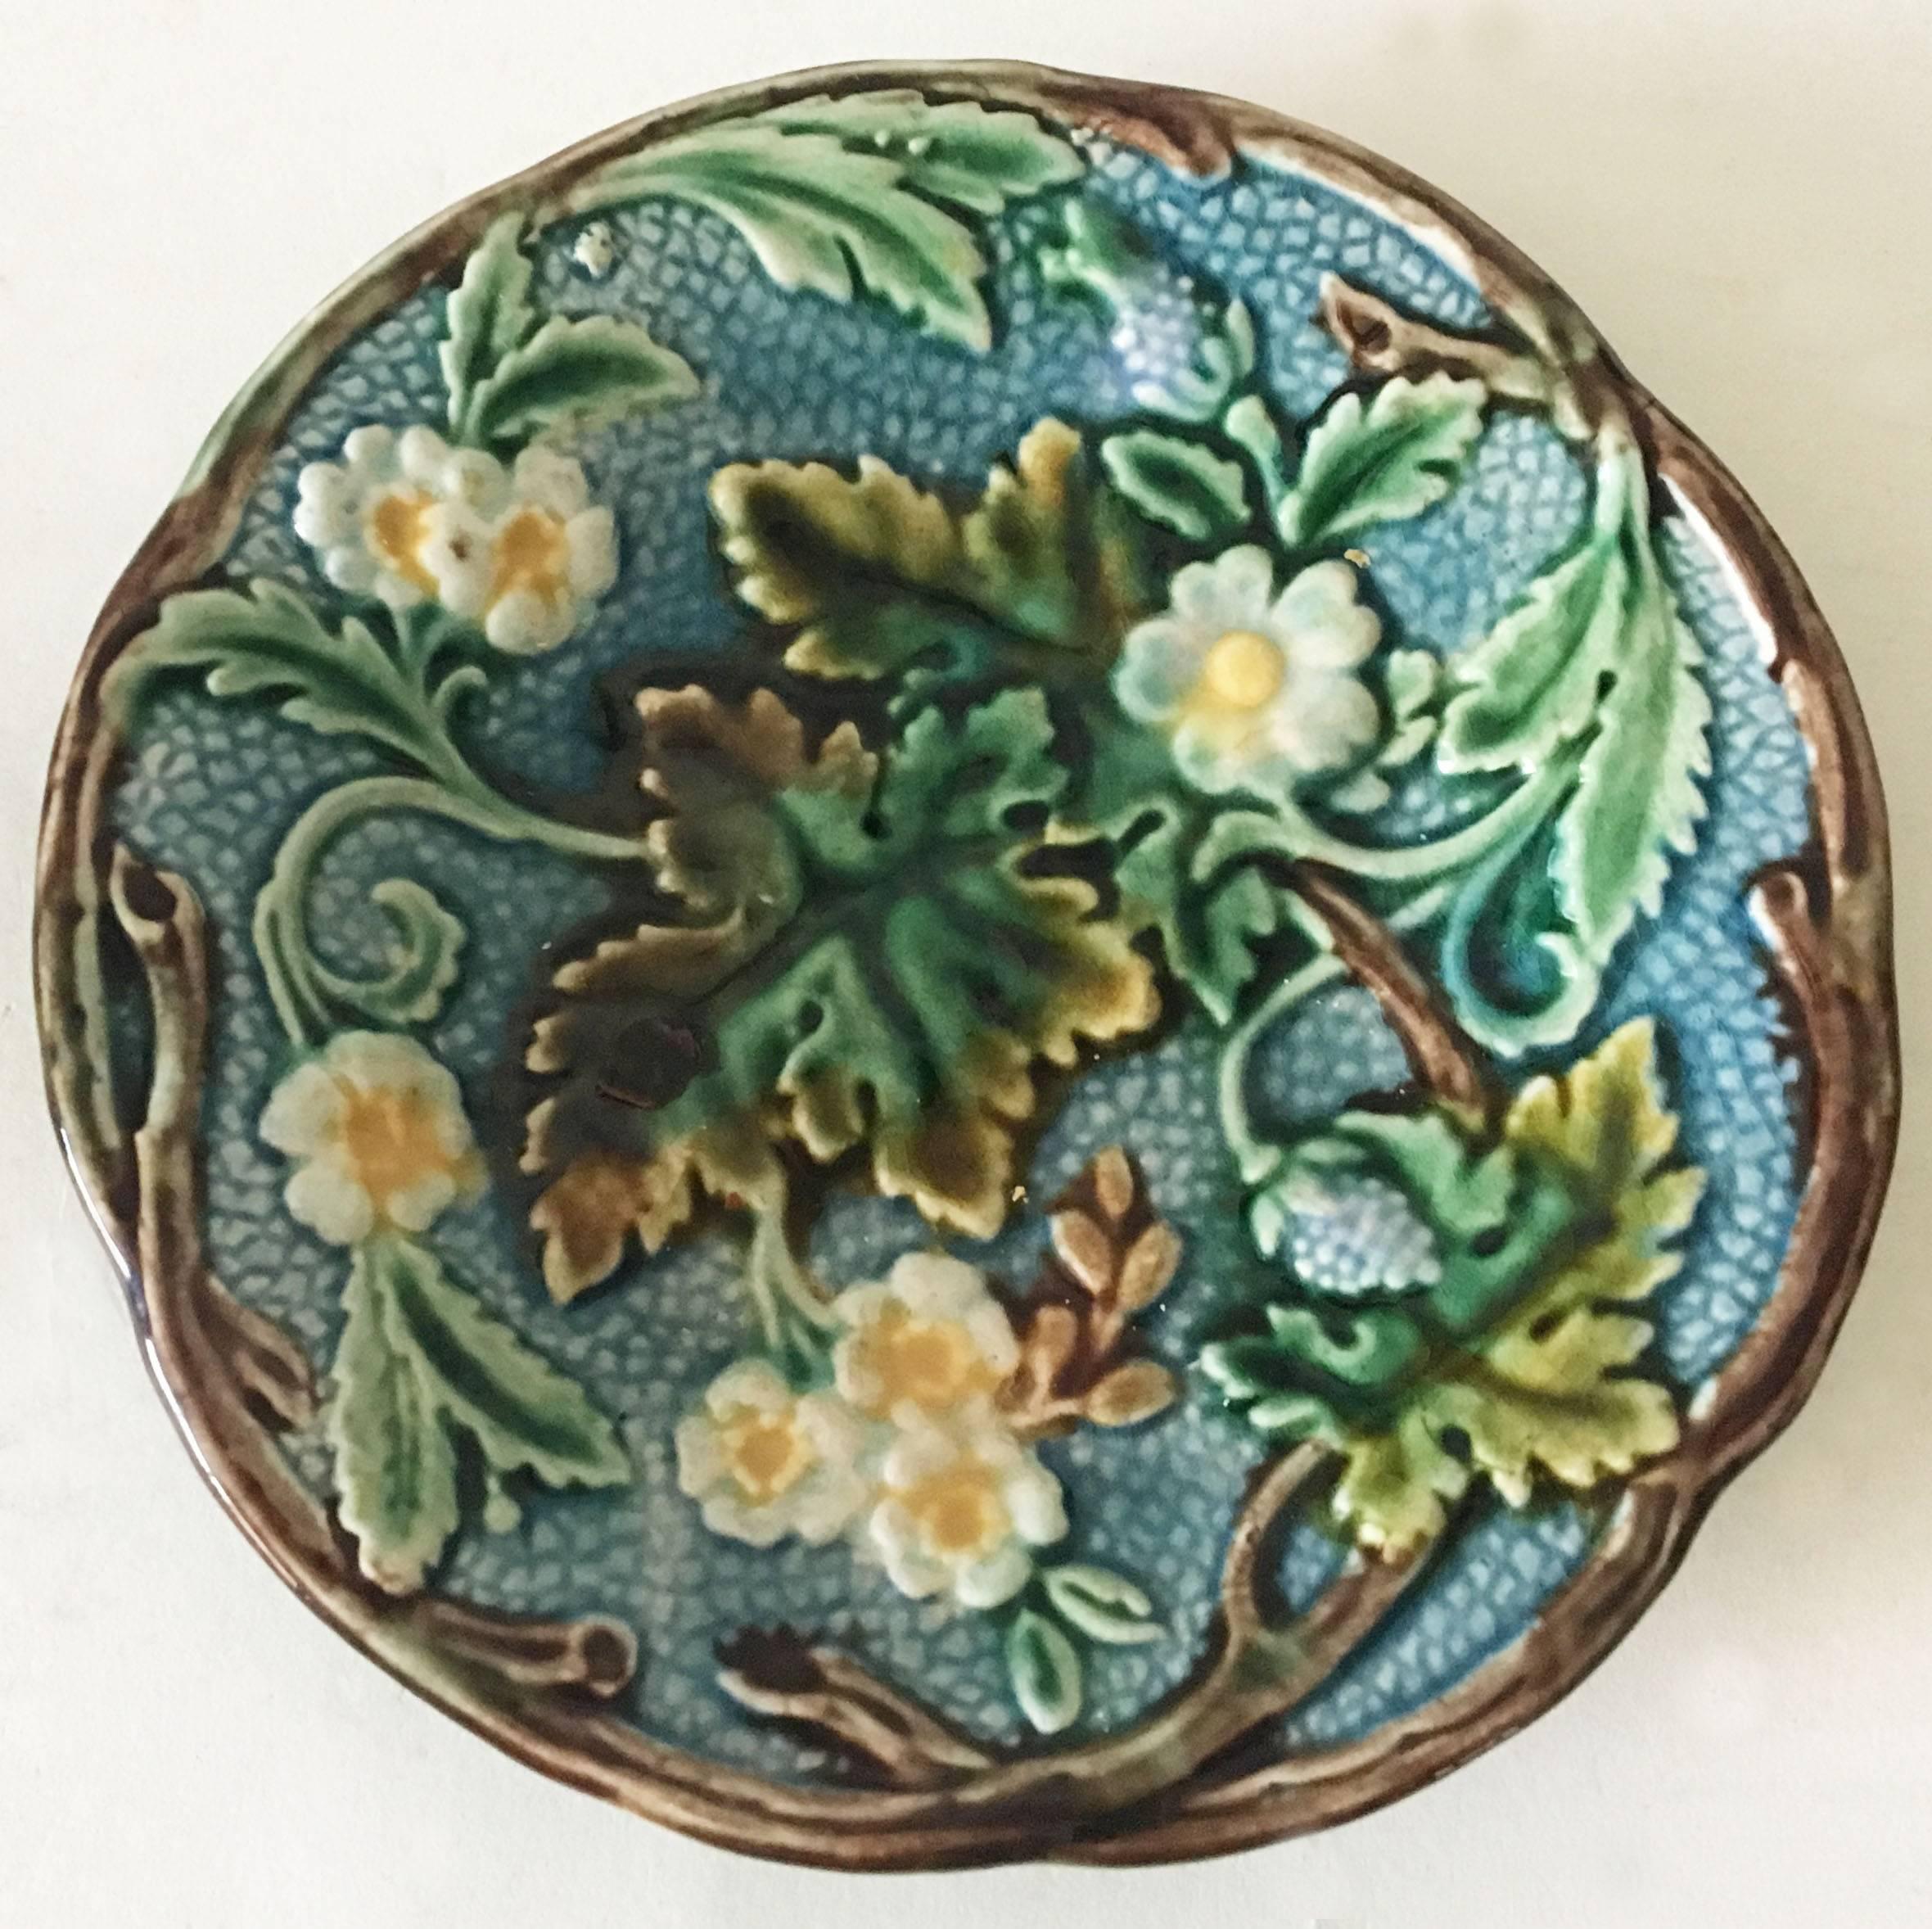 Swedish Majolica dessert plate signed Rörstrand, circa 1897. 
Decorated with white flowers and berries on a blue background, branches on the border.
7 plates available.